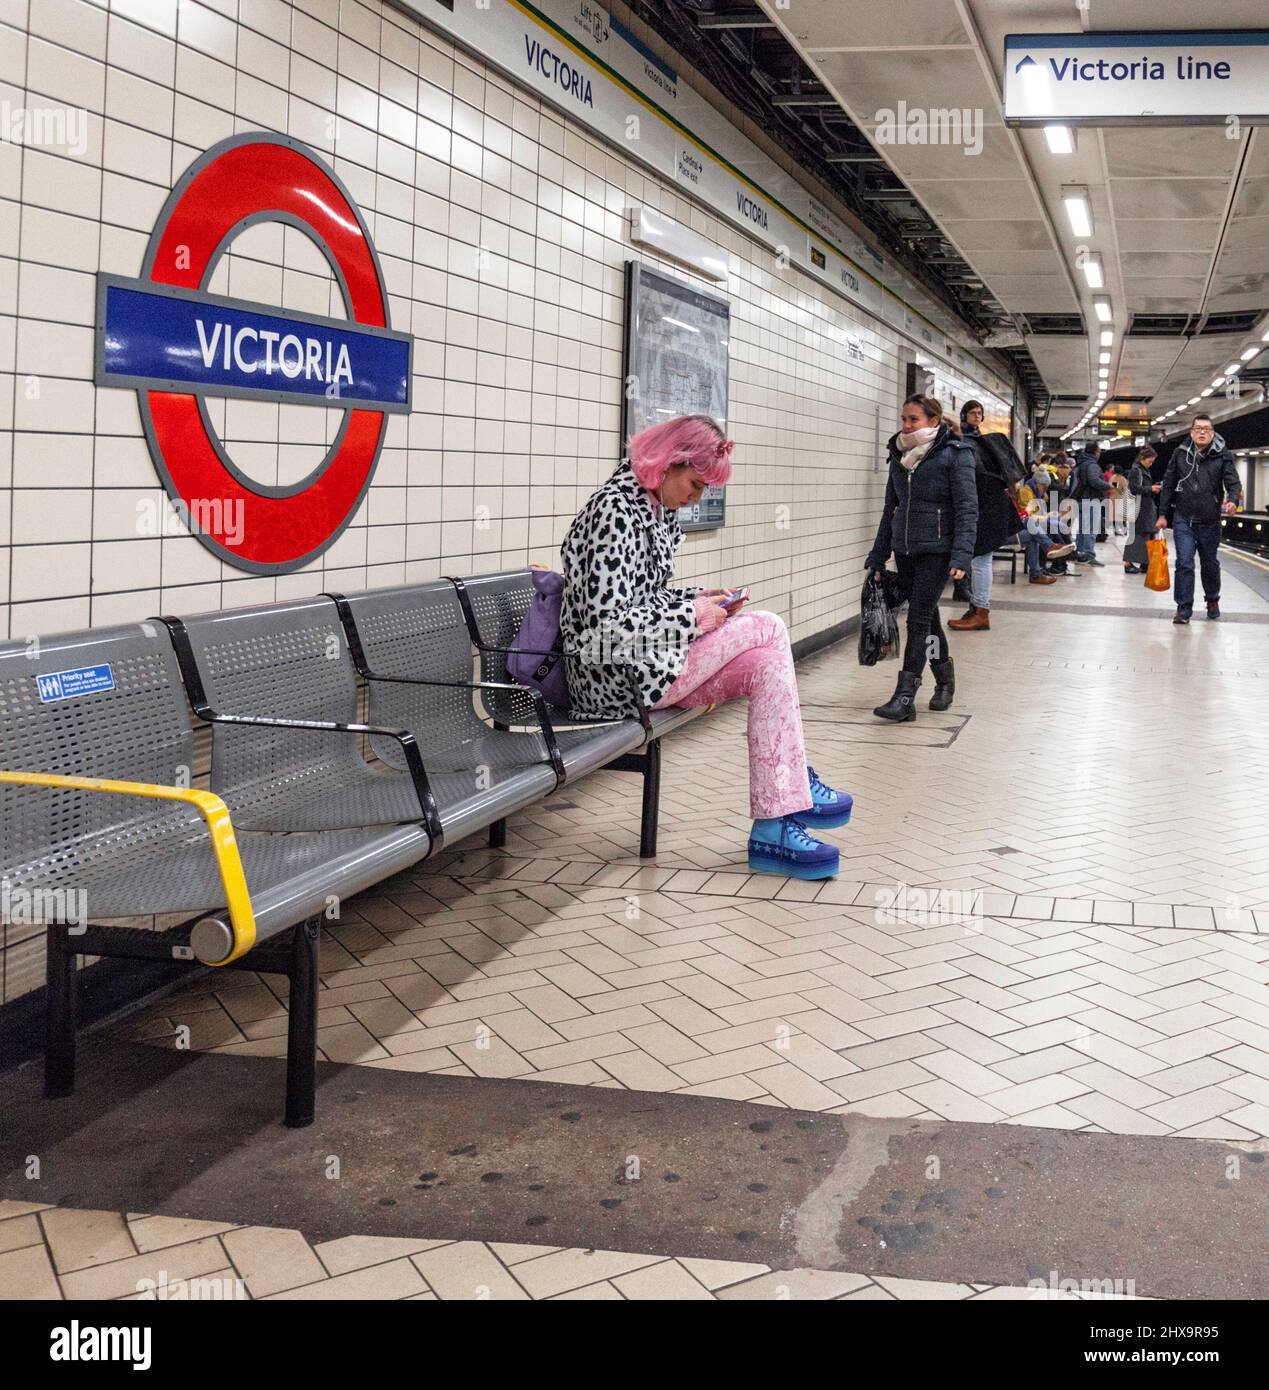 London Victoria Victoria line London underground platforms with waiting tube passengers including on on a bench in front of the Underground roundel Stock Photo